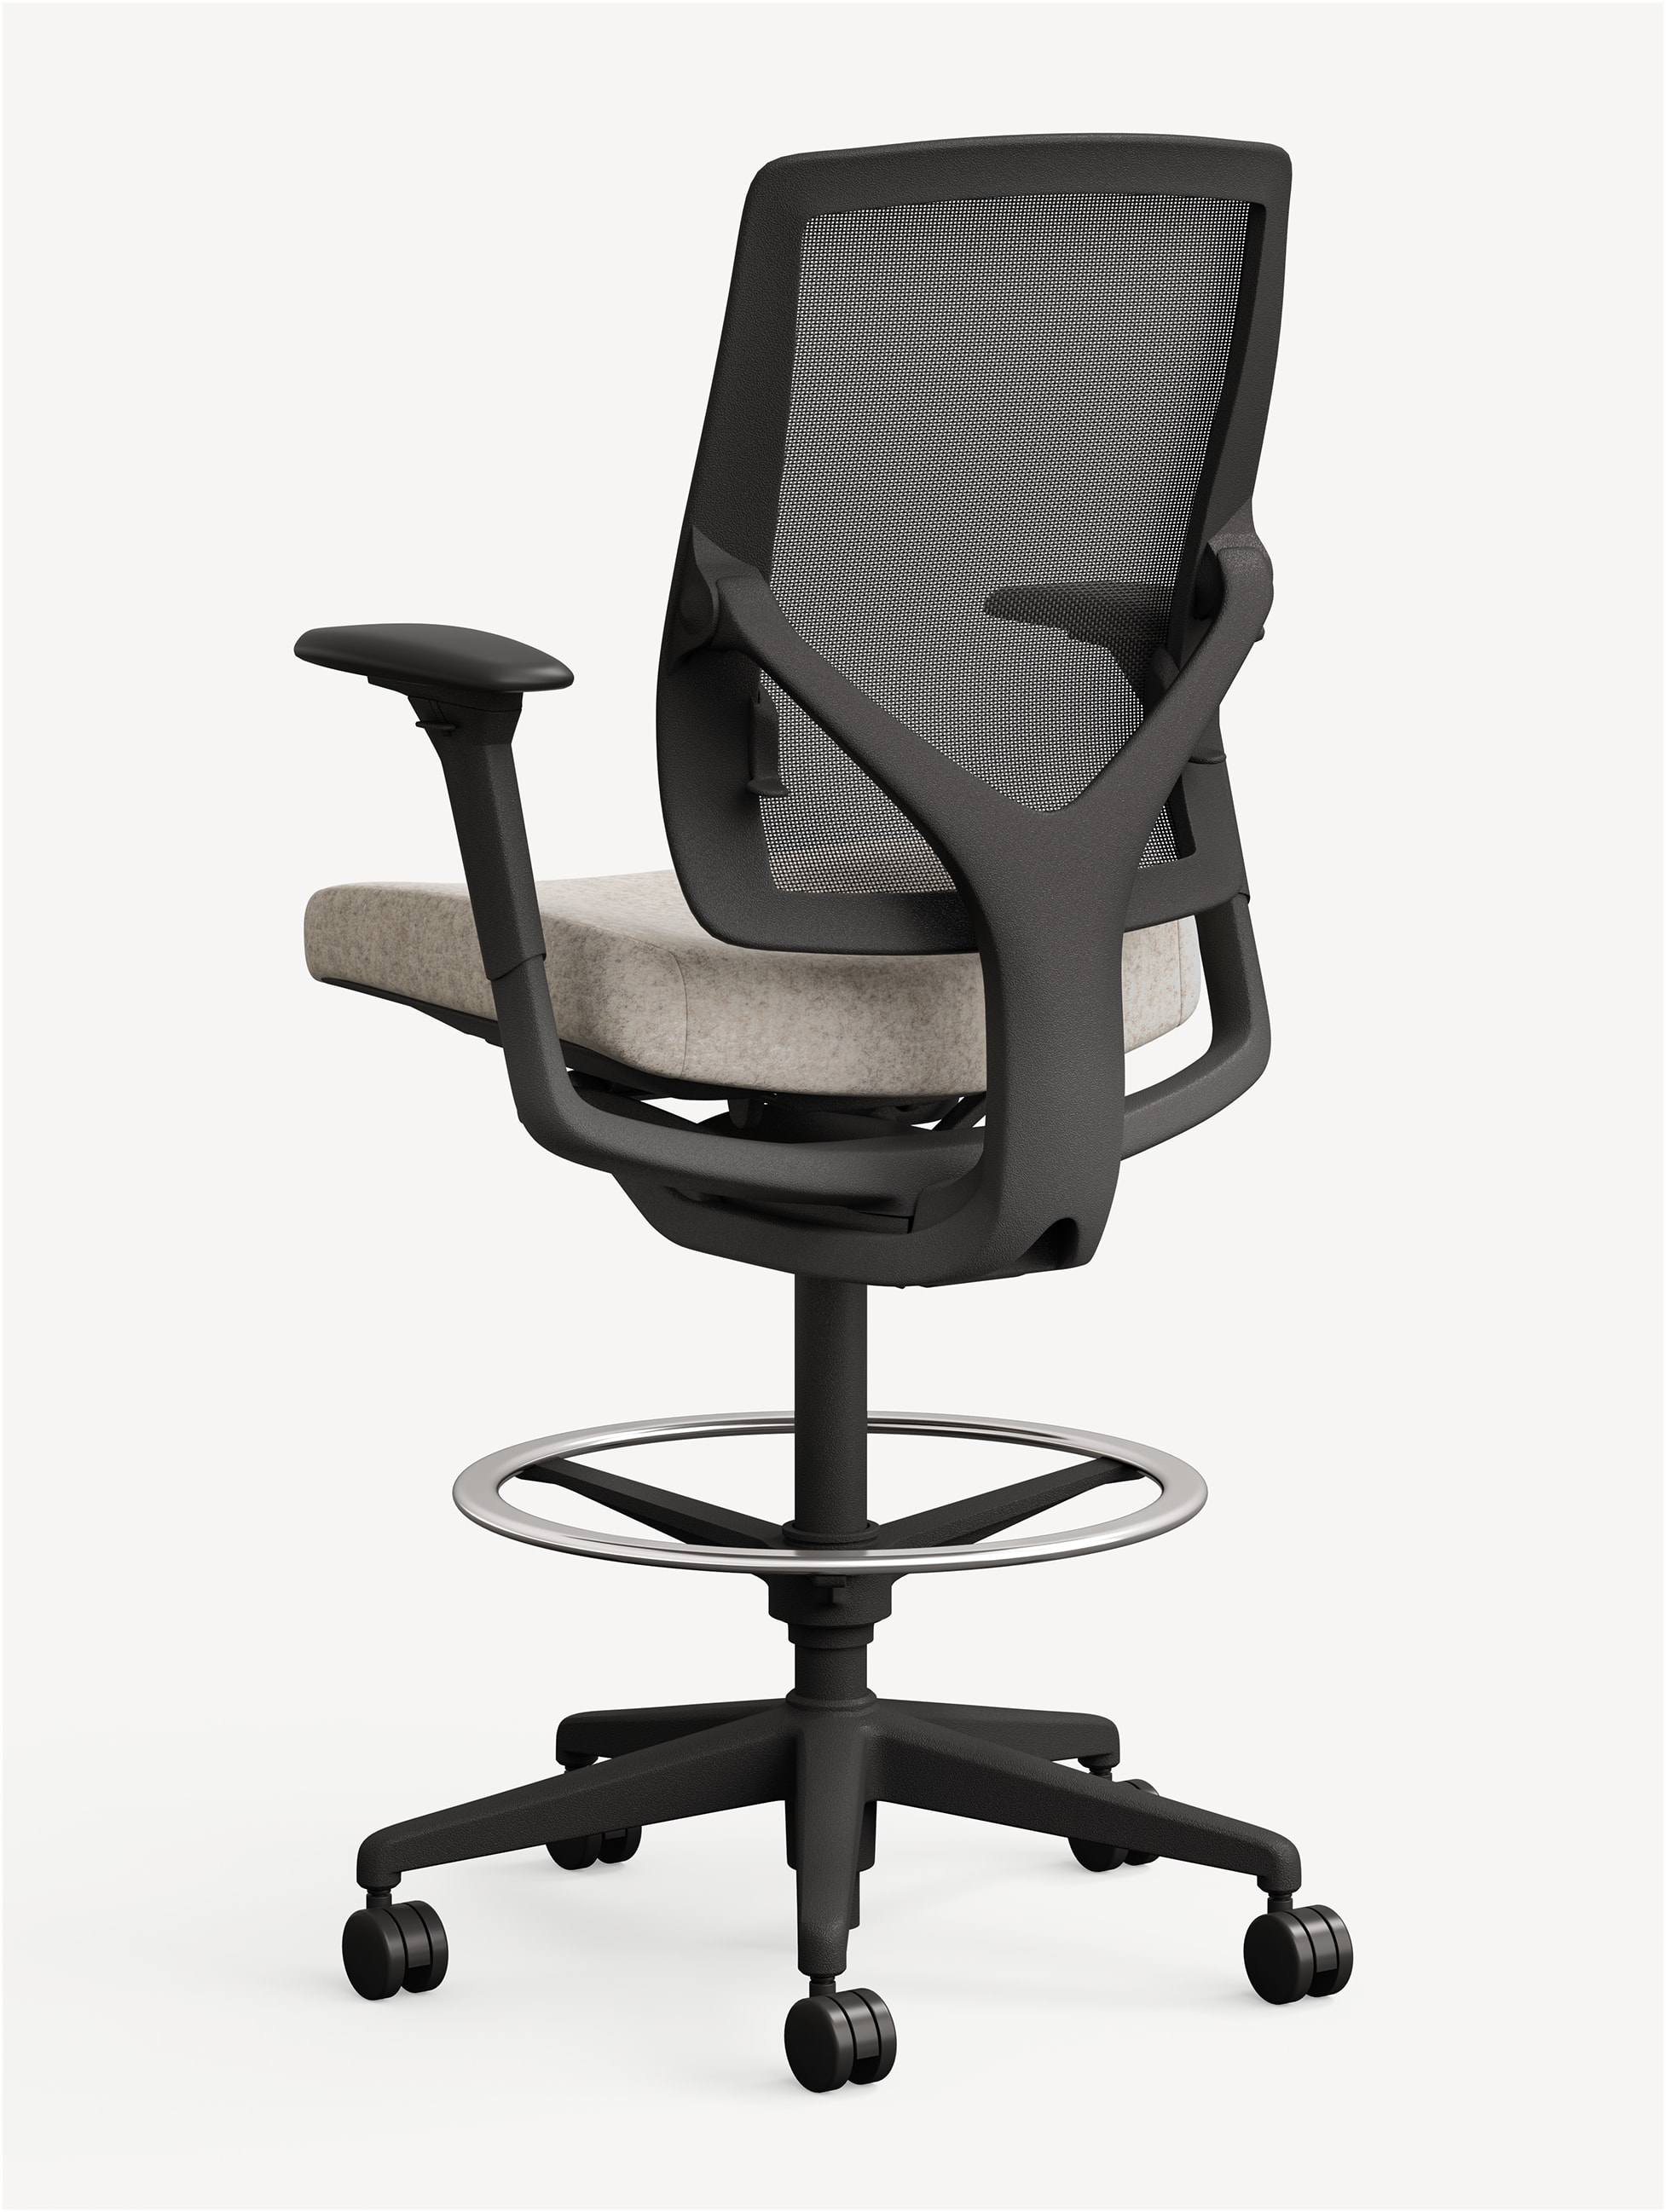 Back view of the Allsteel Relate work stool with a black frame, black mesh back, silver footrest and light greyish tan seat.